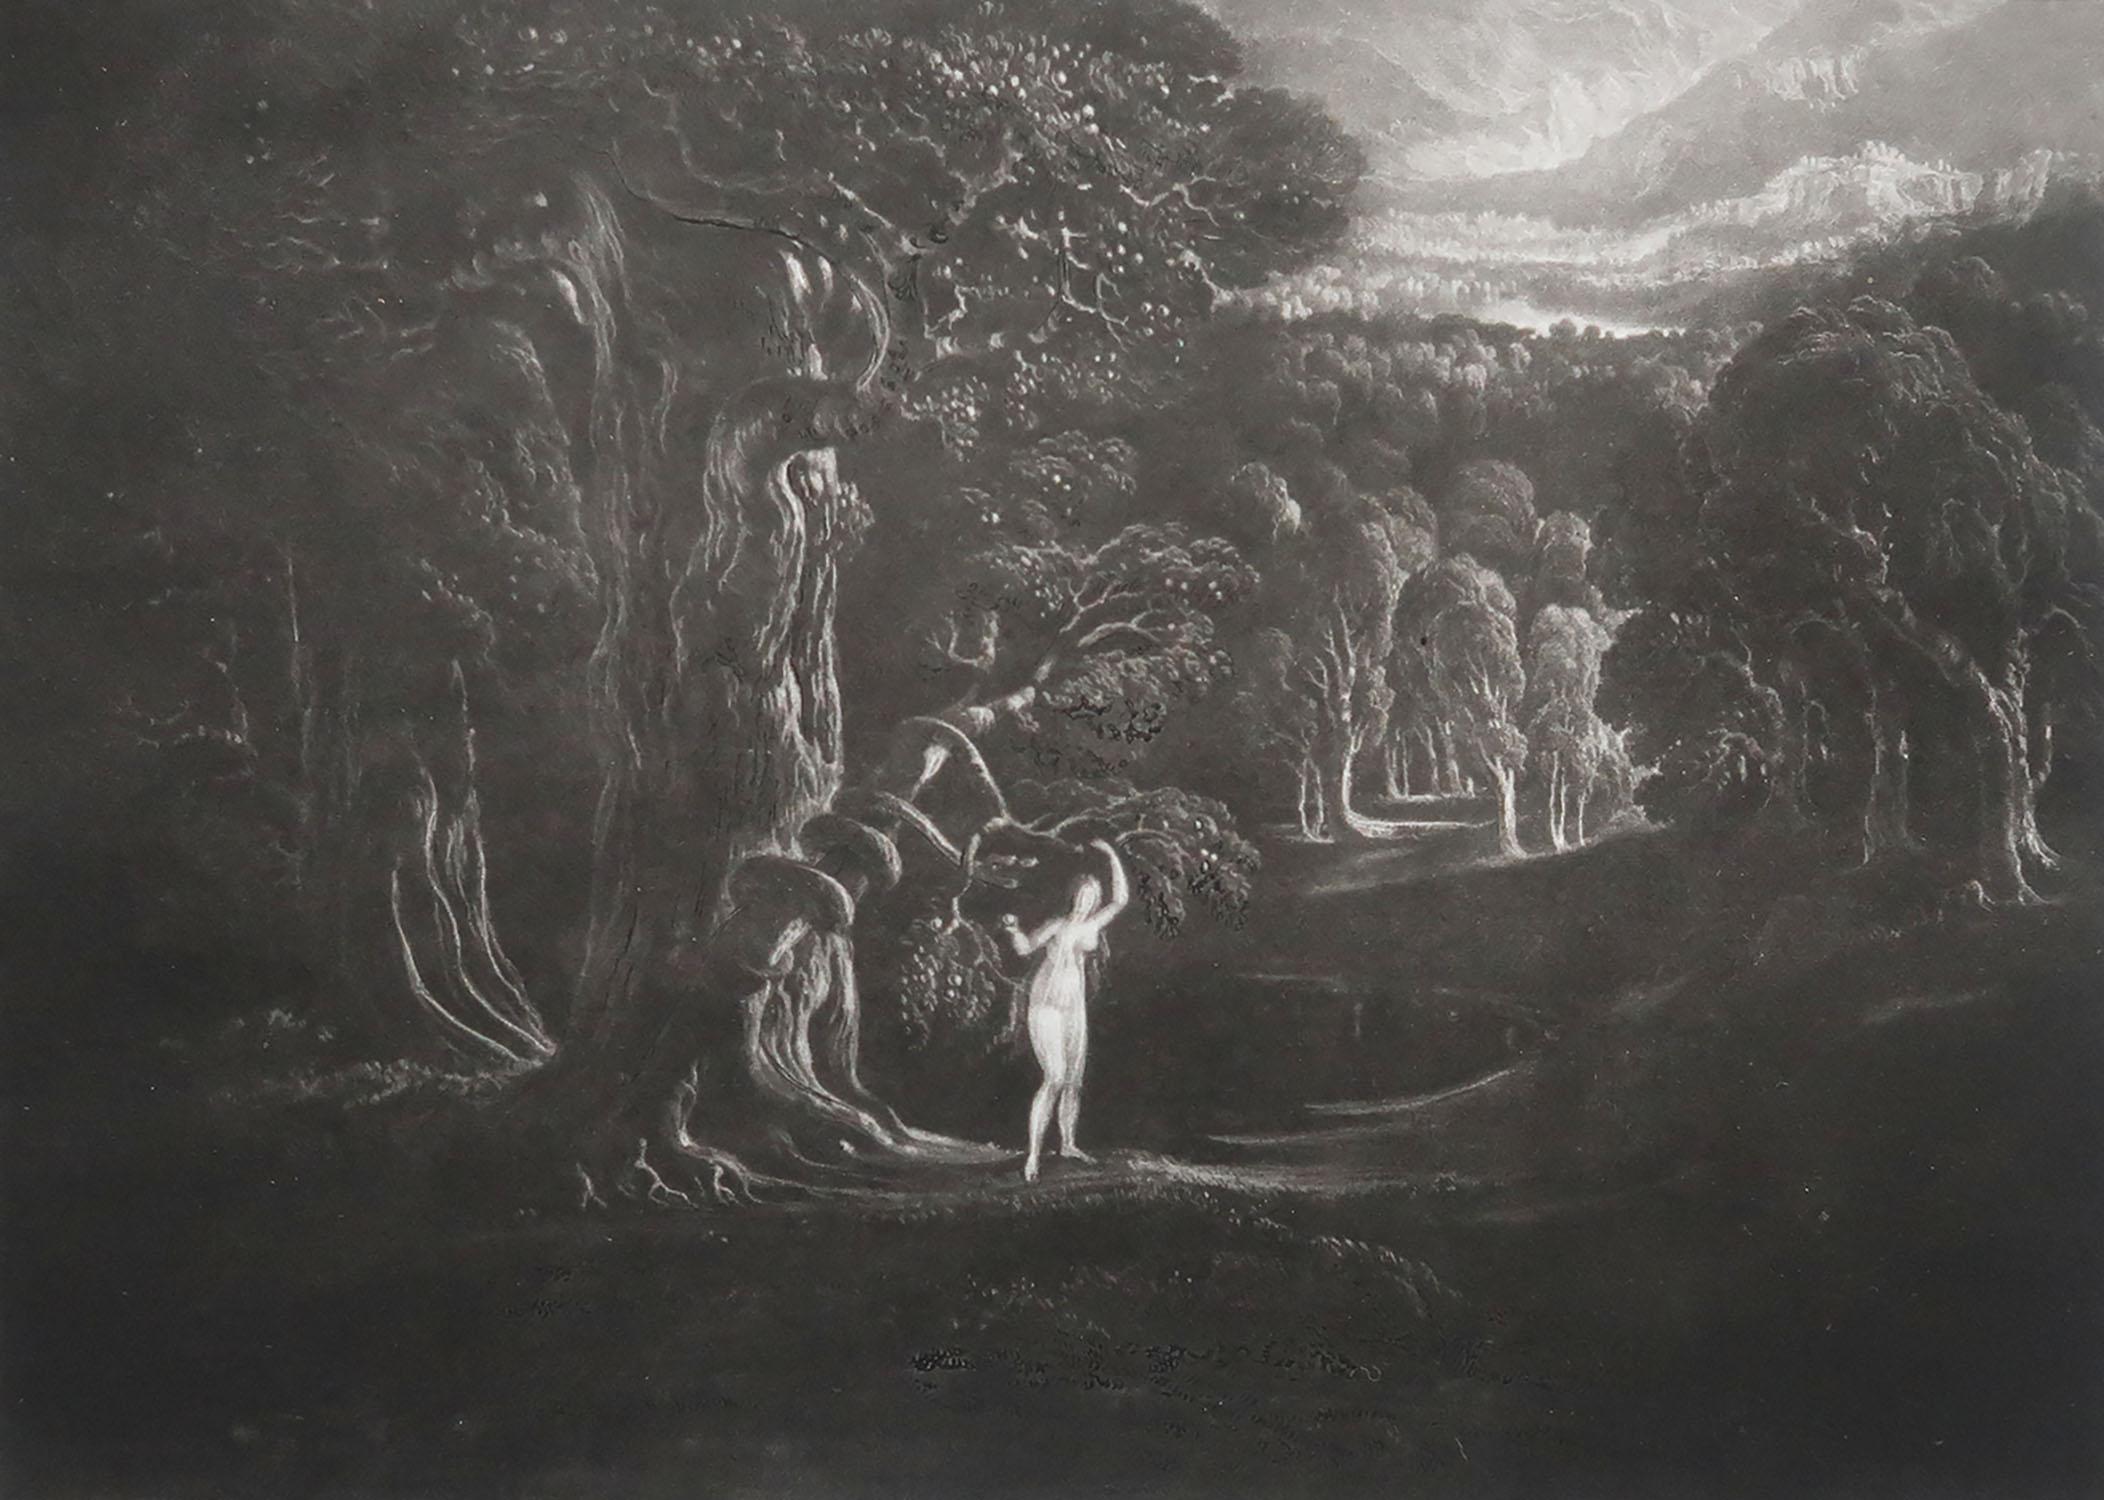 Sensational image by John Martin.

Titled Satan Tempting Eve

Drawn and engraved by John Martin. From the highly regarded Washbourne Publication of Milton's Paradise Lost, 1853.

Unframed.

